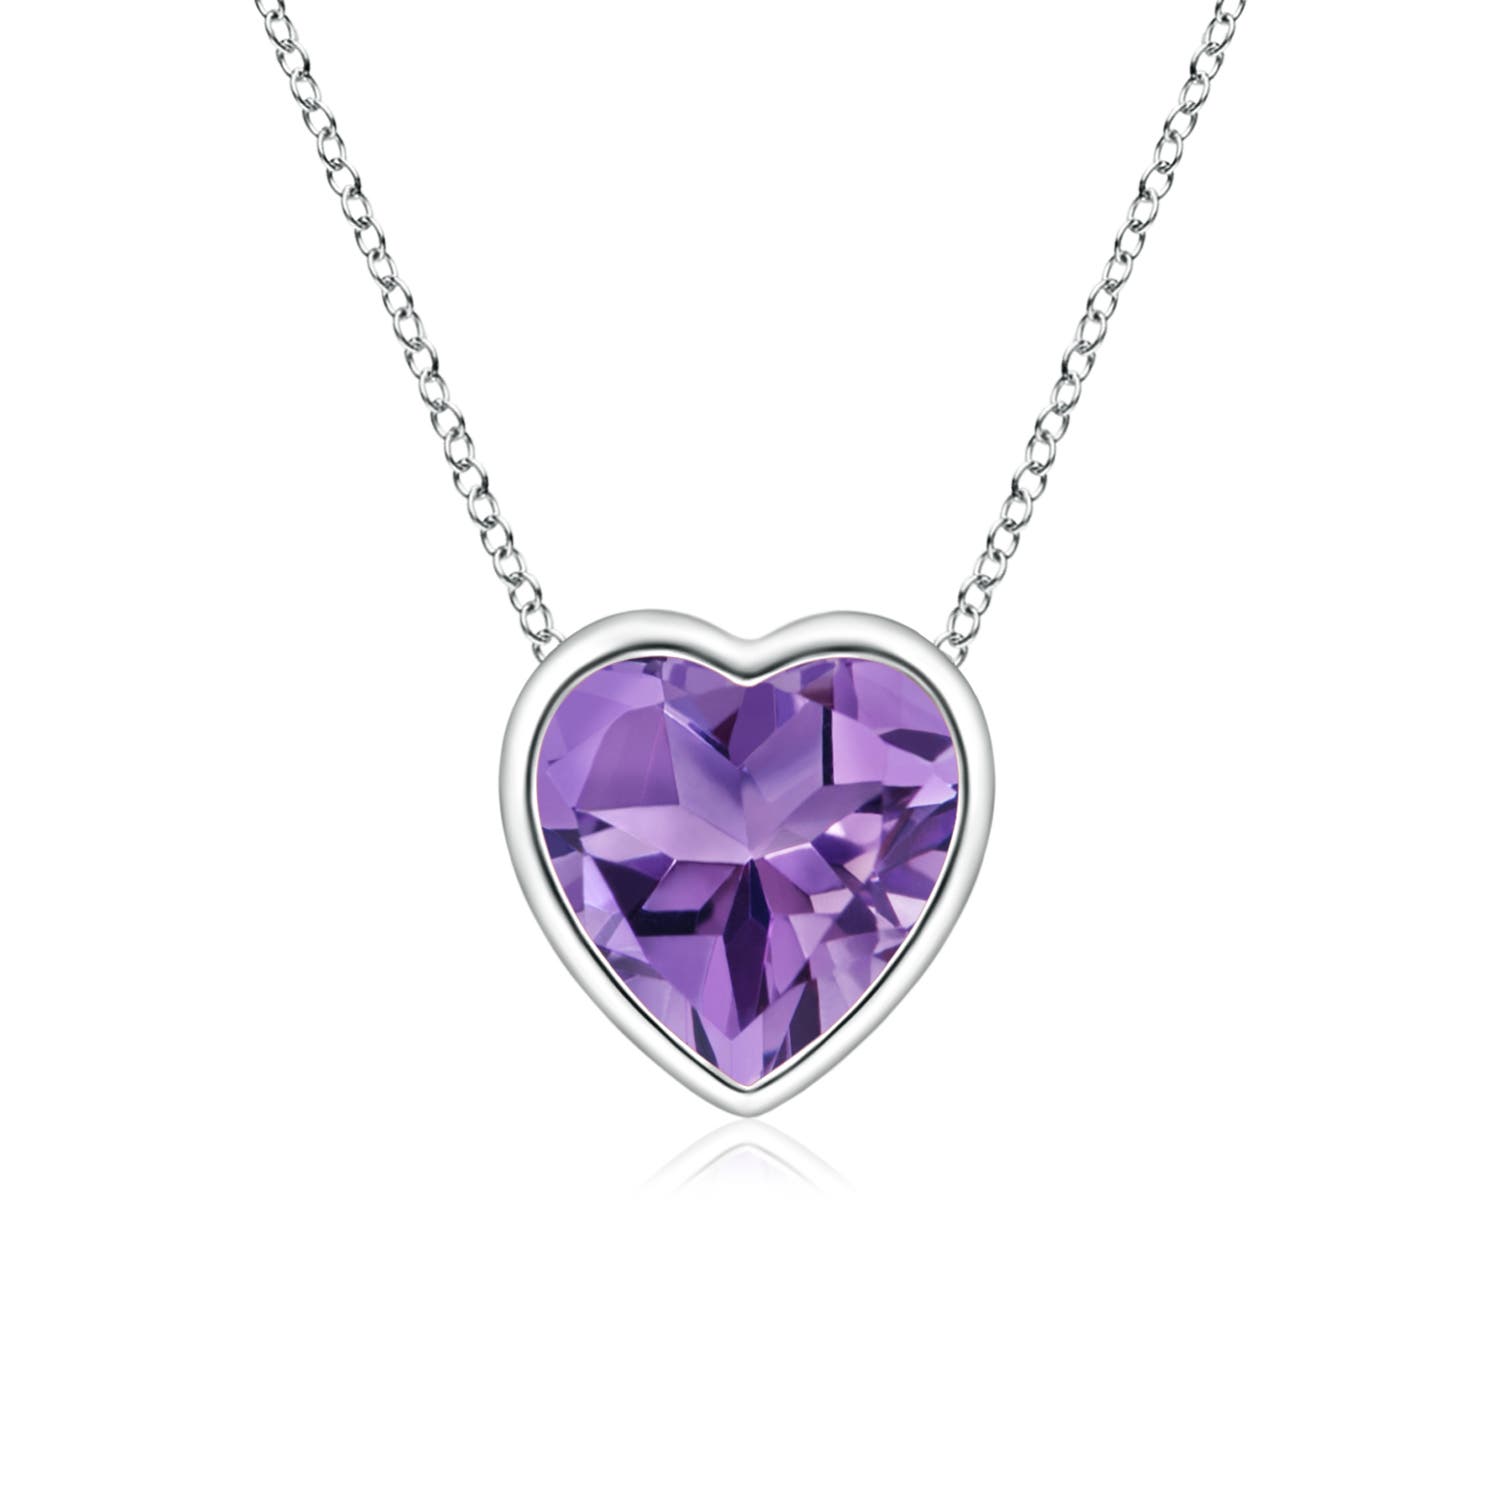 AA - Amethyst / 0.35 CT / 14 KT White Gold